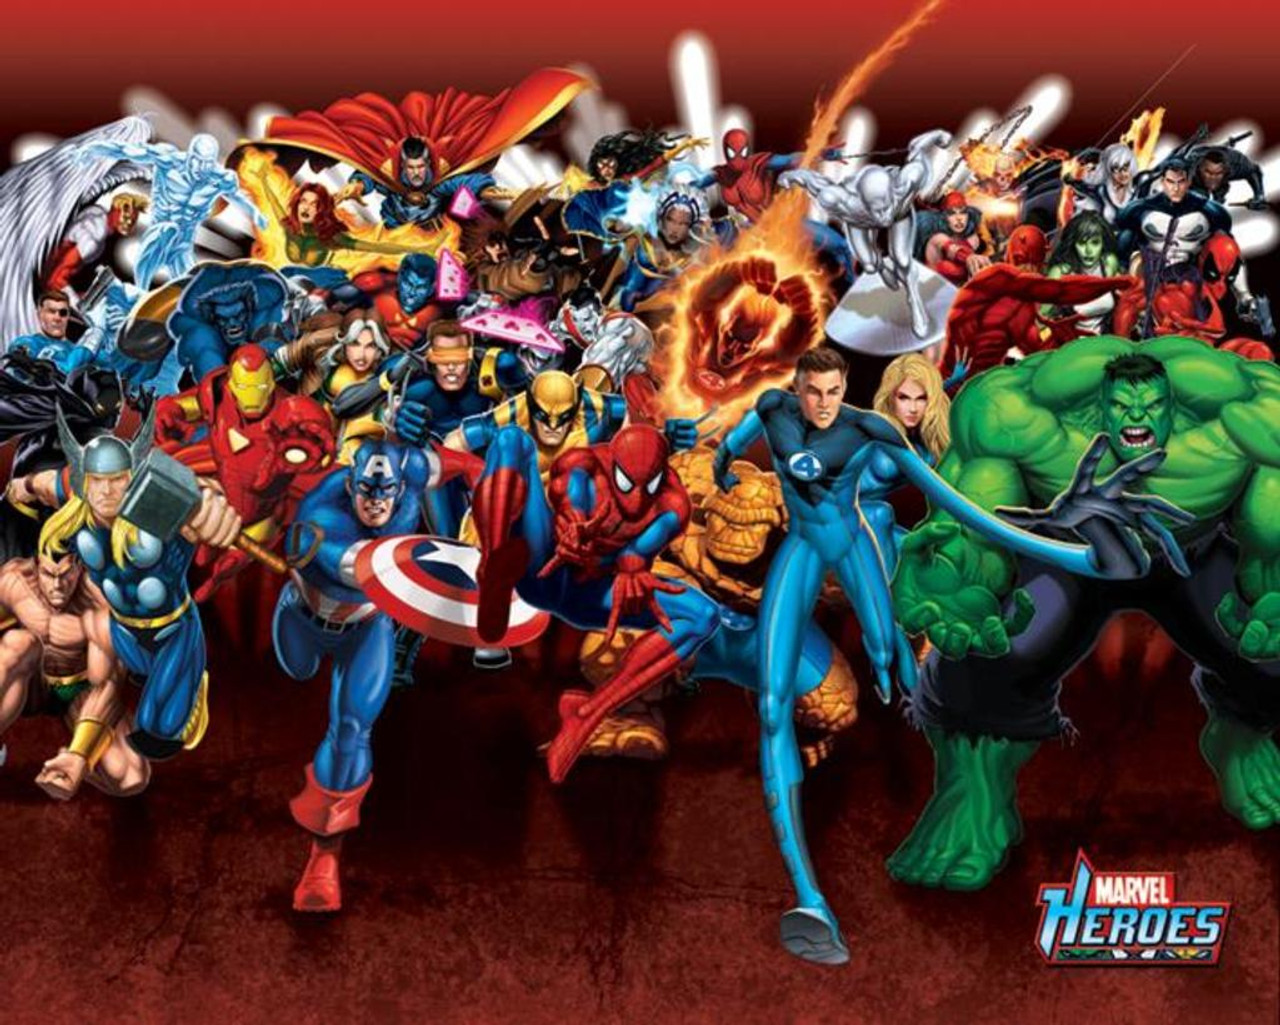 Marvel Heroes Attack Comic Book Cool Wall Decor Art Print Poster